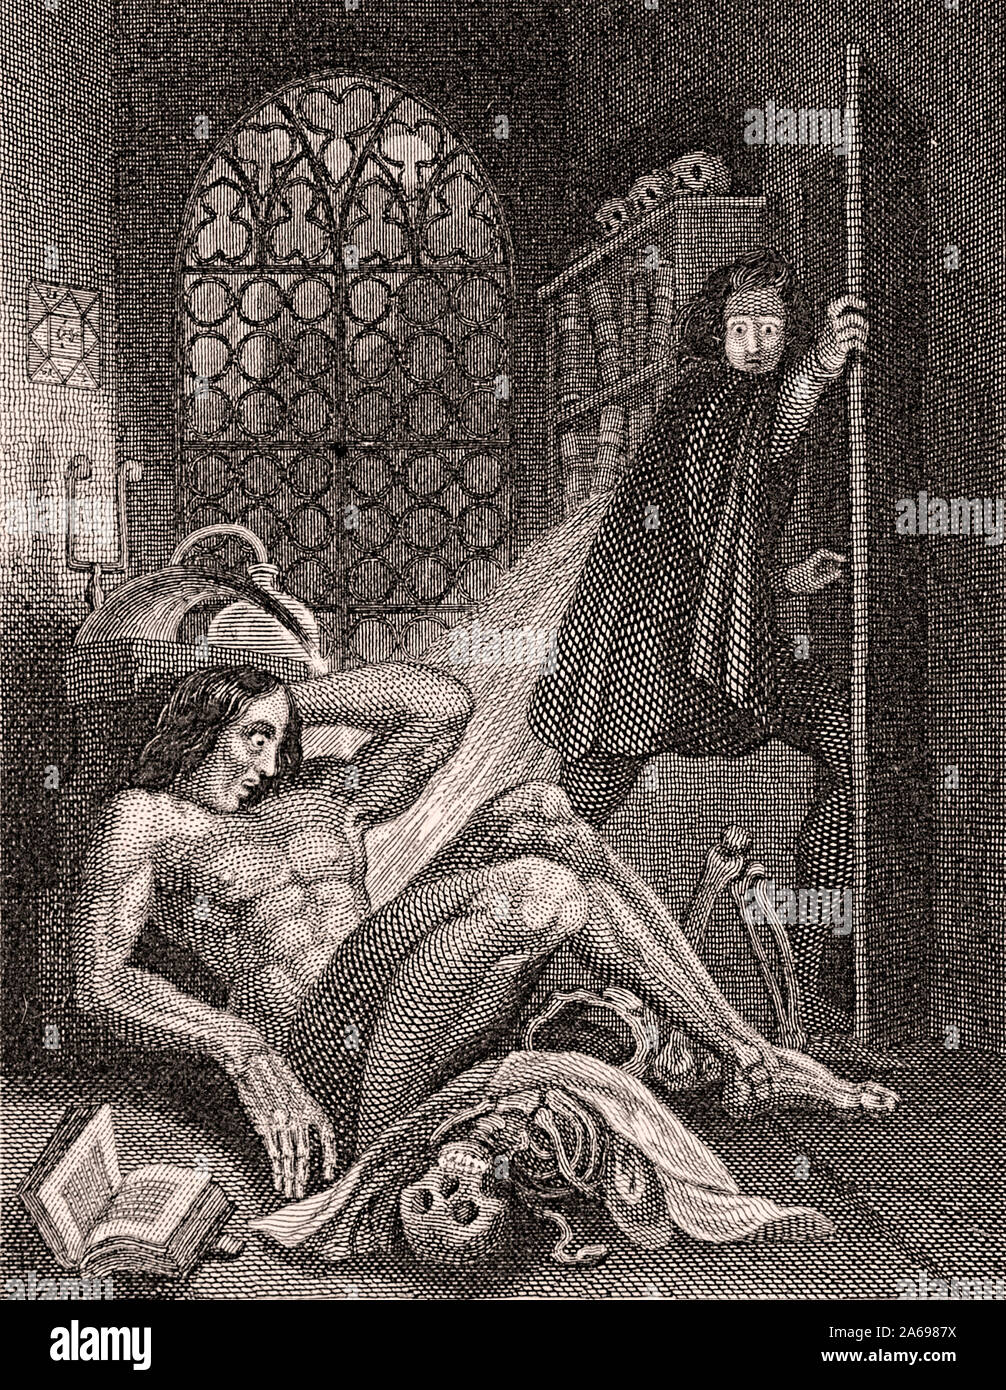 Victor Frankenstein becoming disgusted at his creation. Illustration from the frontispiece of the 1831 edition. Stock Photo